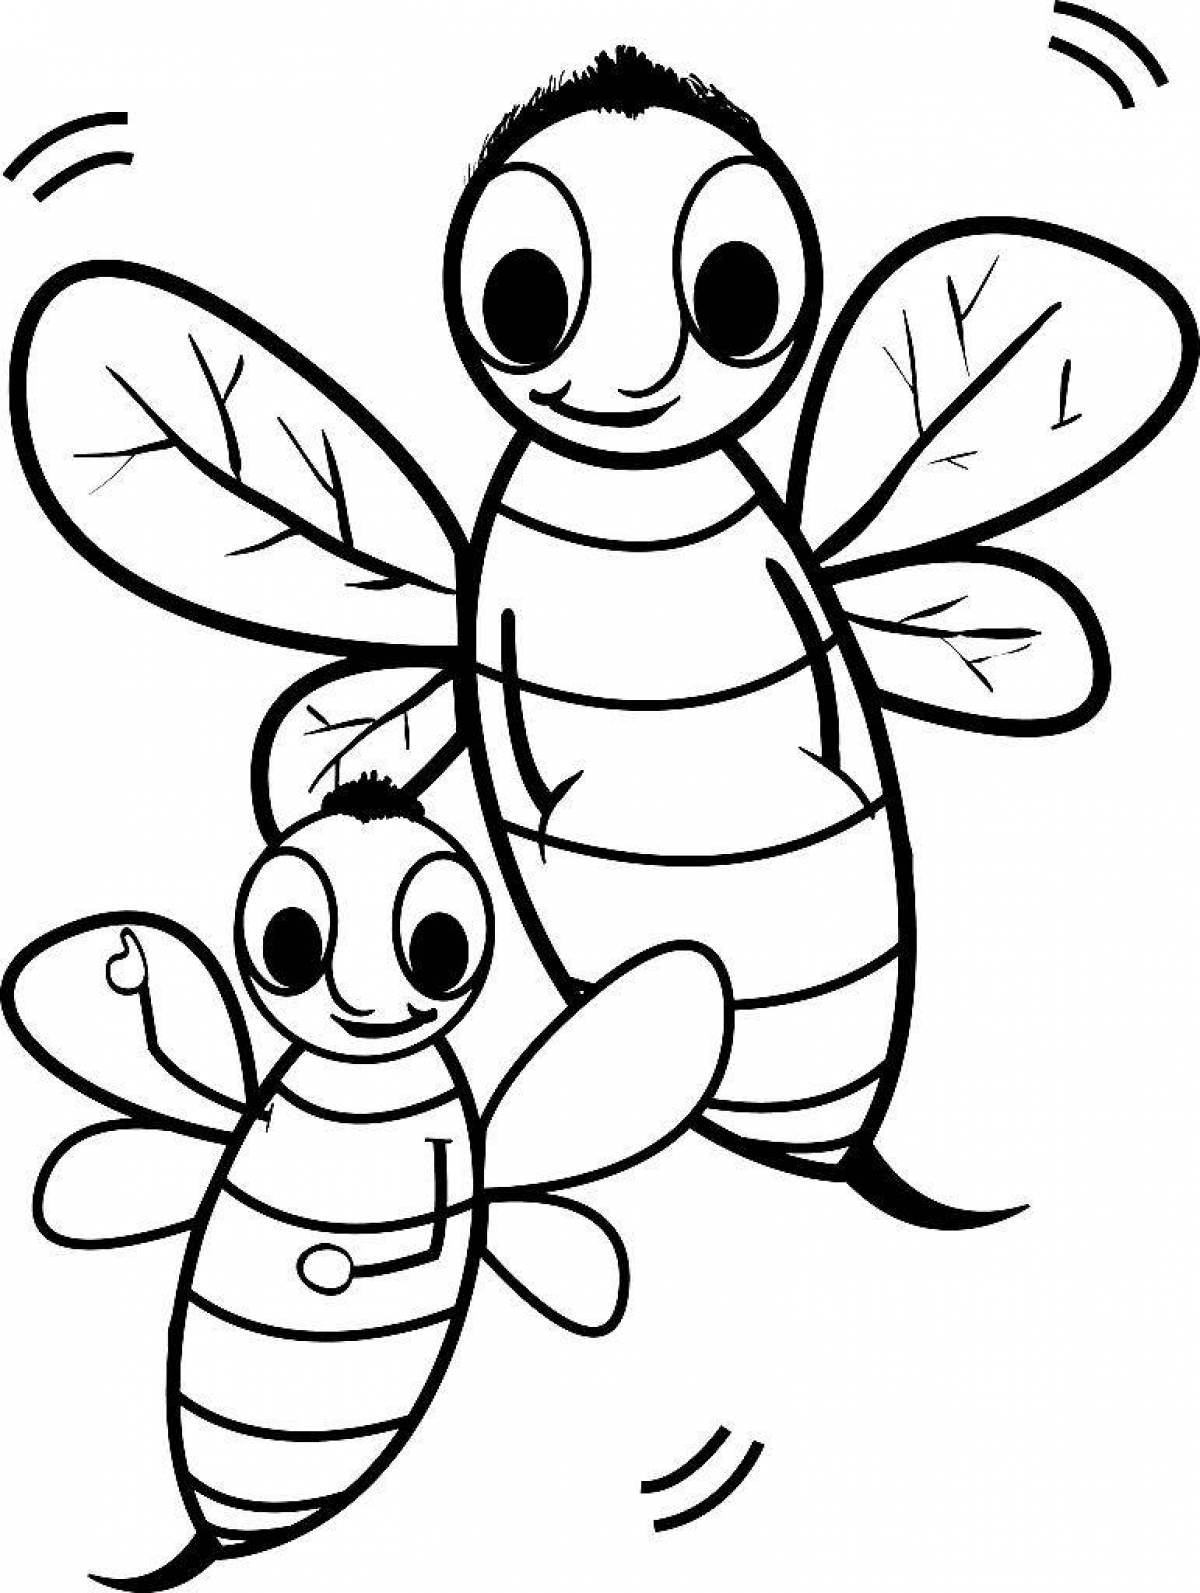 Colorful beekeeper coloring page